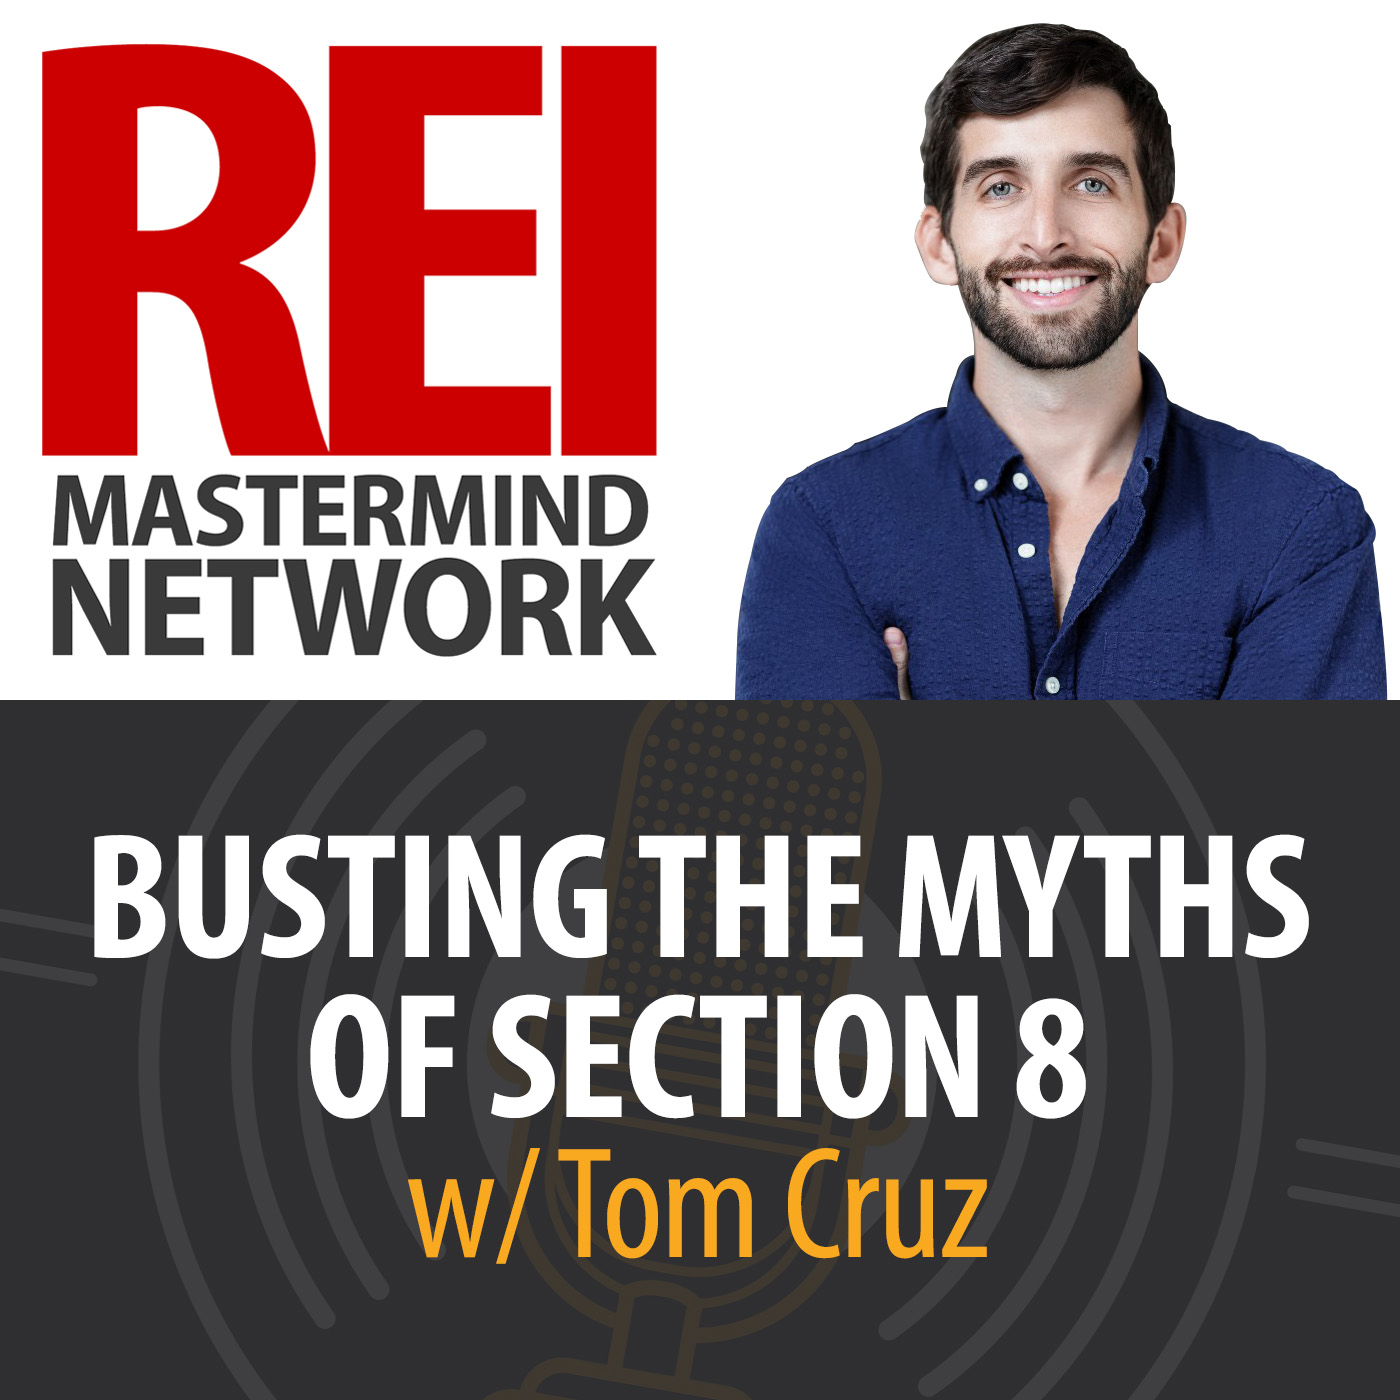 Busting the Myths of Section 8 with Tom Cruz